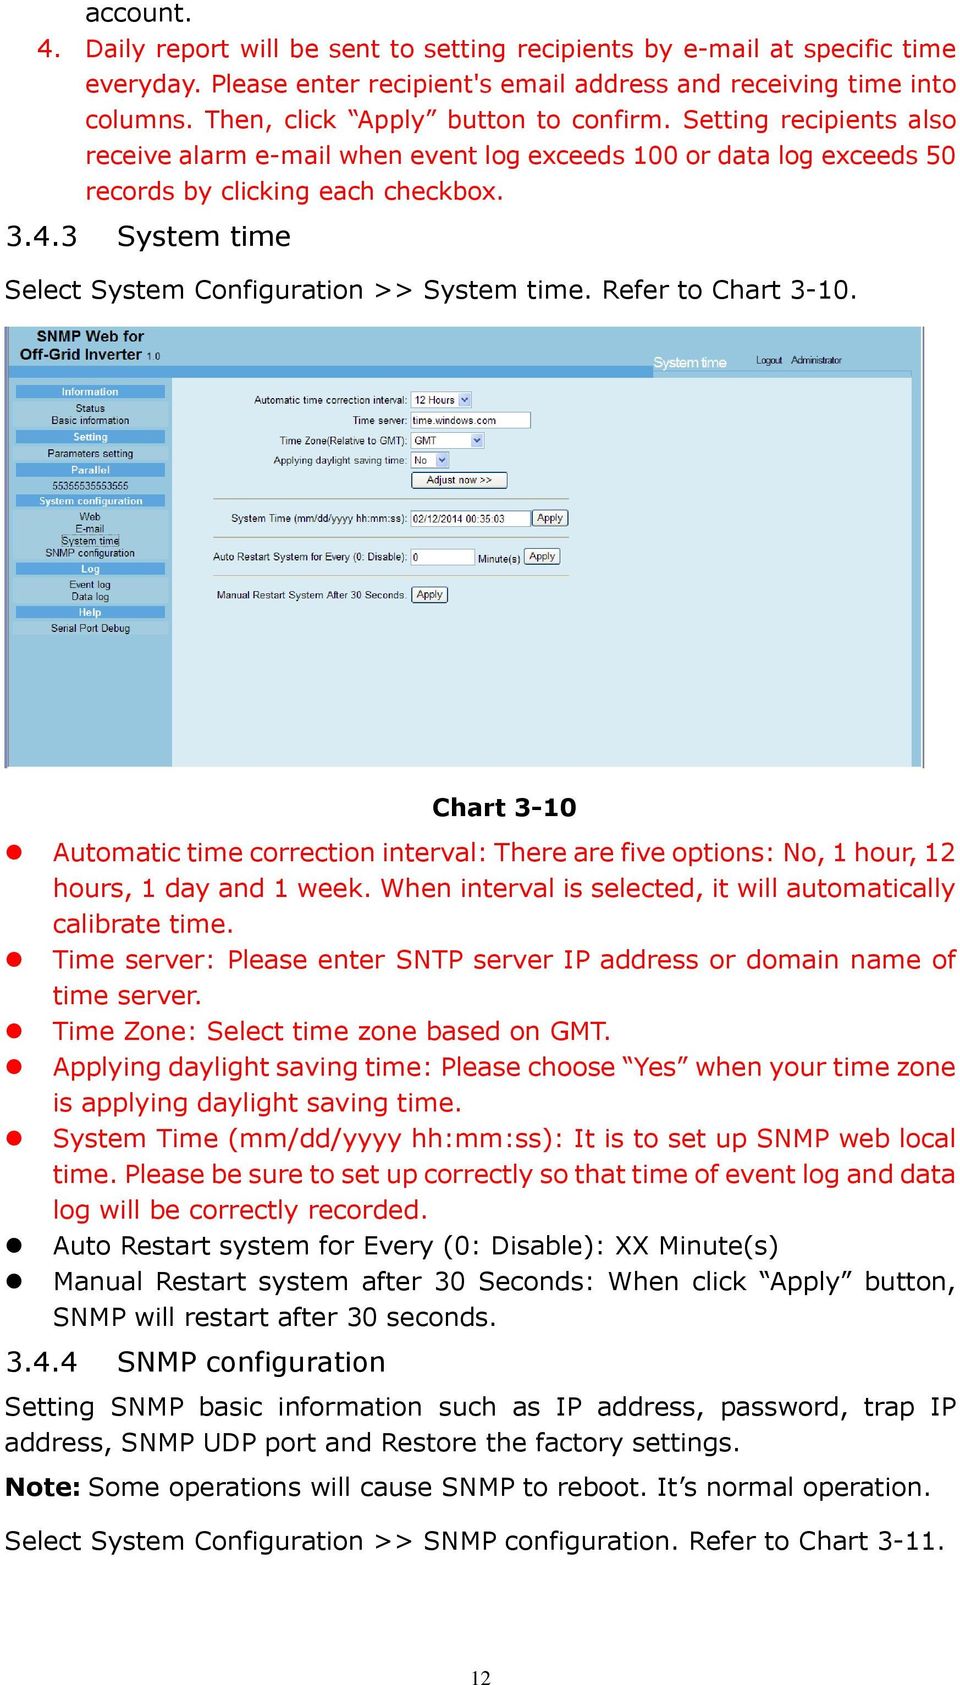 3 System time Select System Configuration >> System time. Refer to Chart 3-10. Chart 3-10 Automatic time correction interval: There are five options: No, 1 hour, 12 hours, 1 day and 1 week.